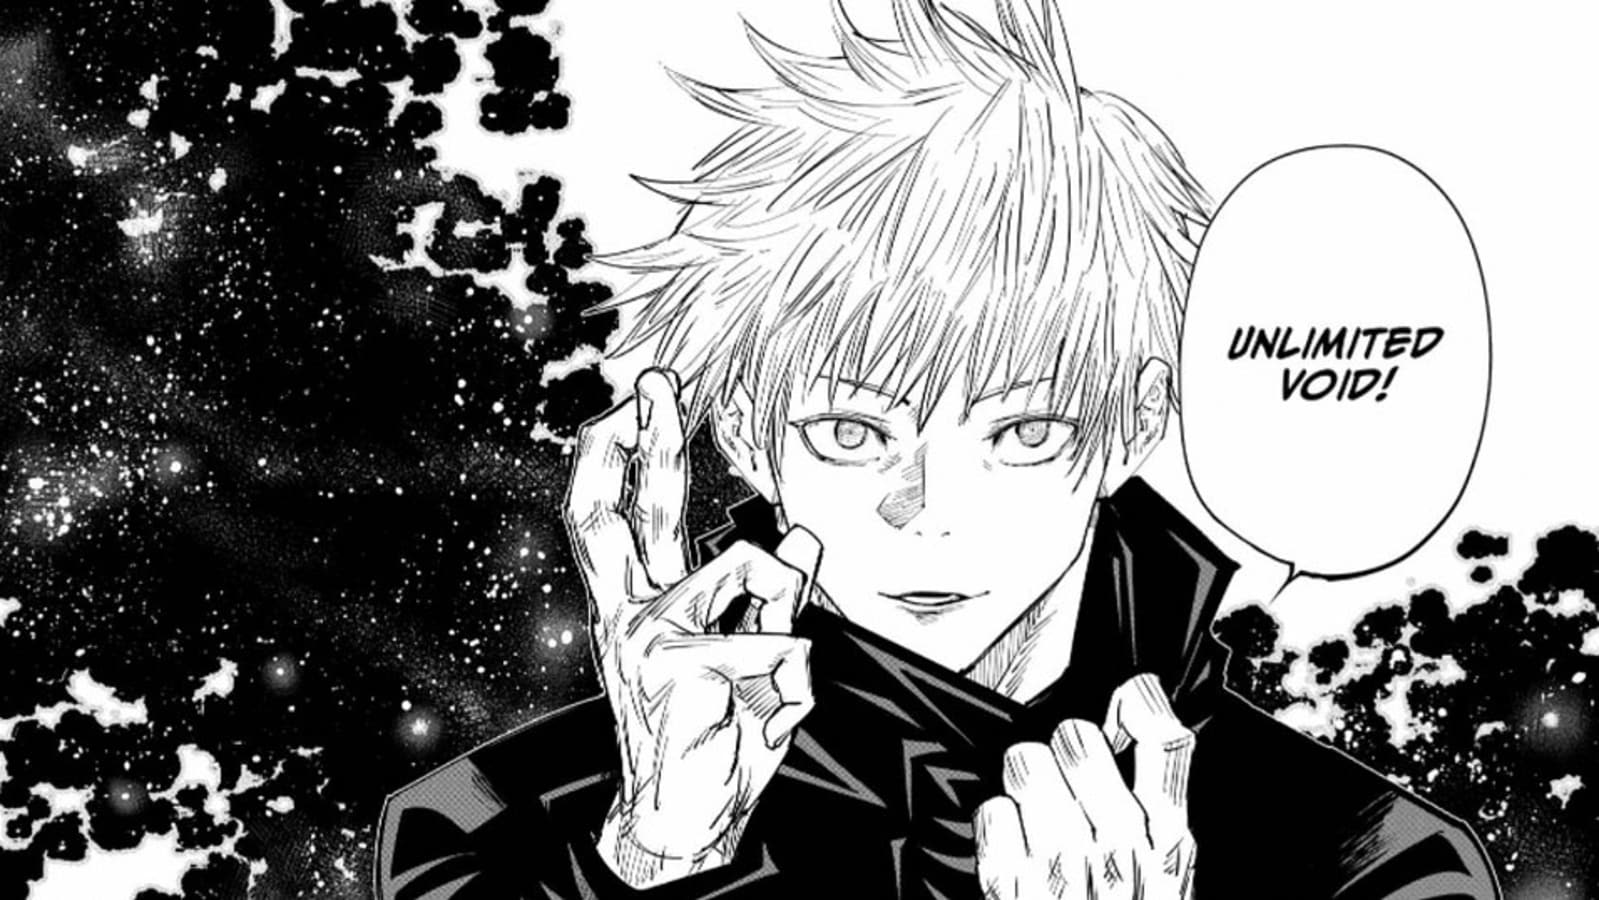 Jujutsu Kaisen Chapter 232 Full Summary Out! An Epic Battle Unveiled! Find Out More! 14